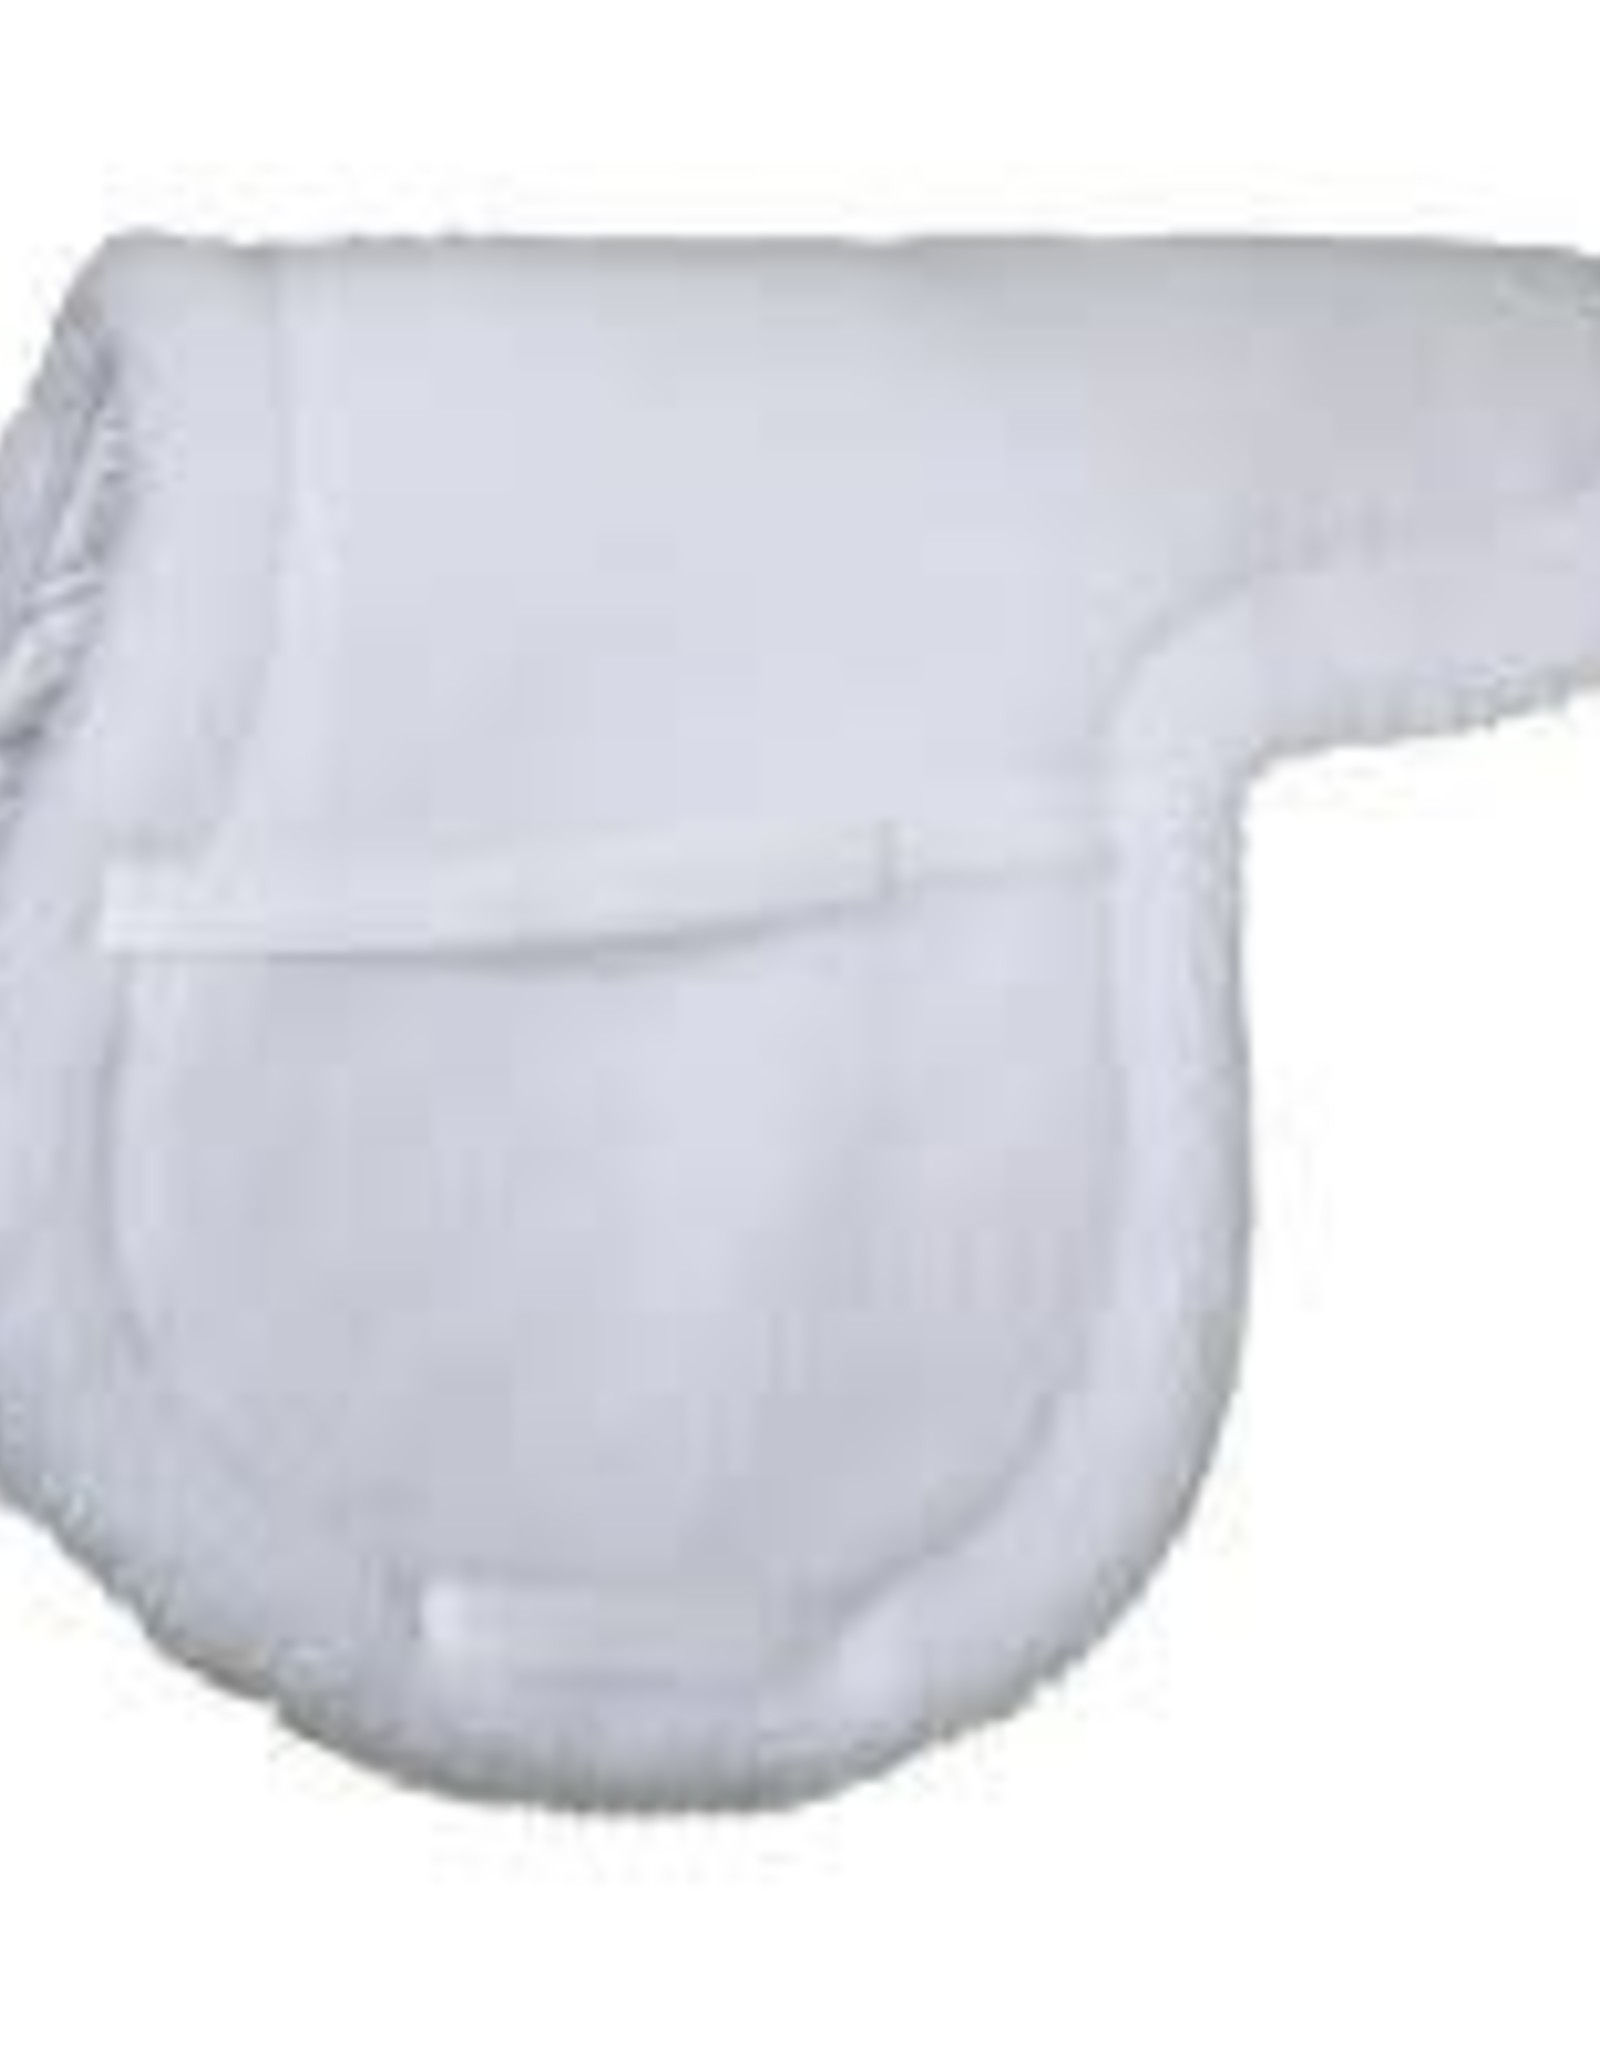 Tough 1 Quilted Bottom Fleece All Purpose Pad